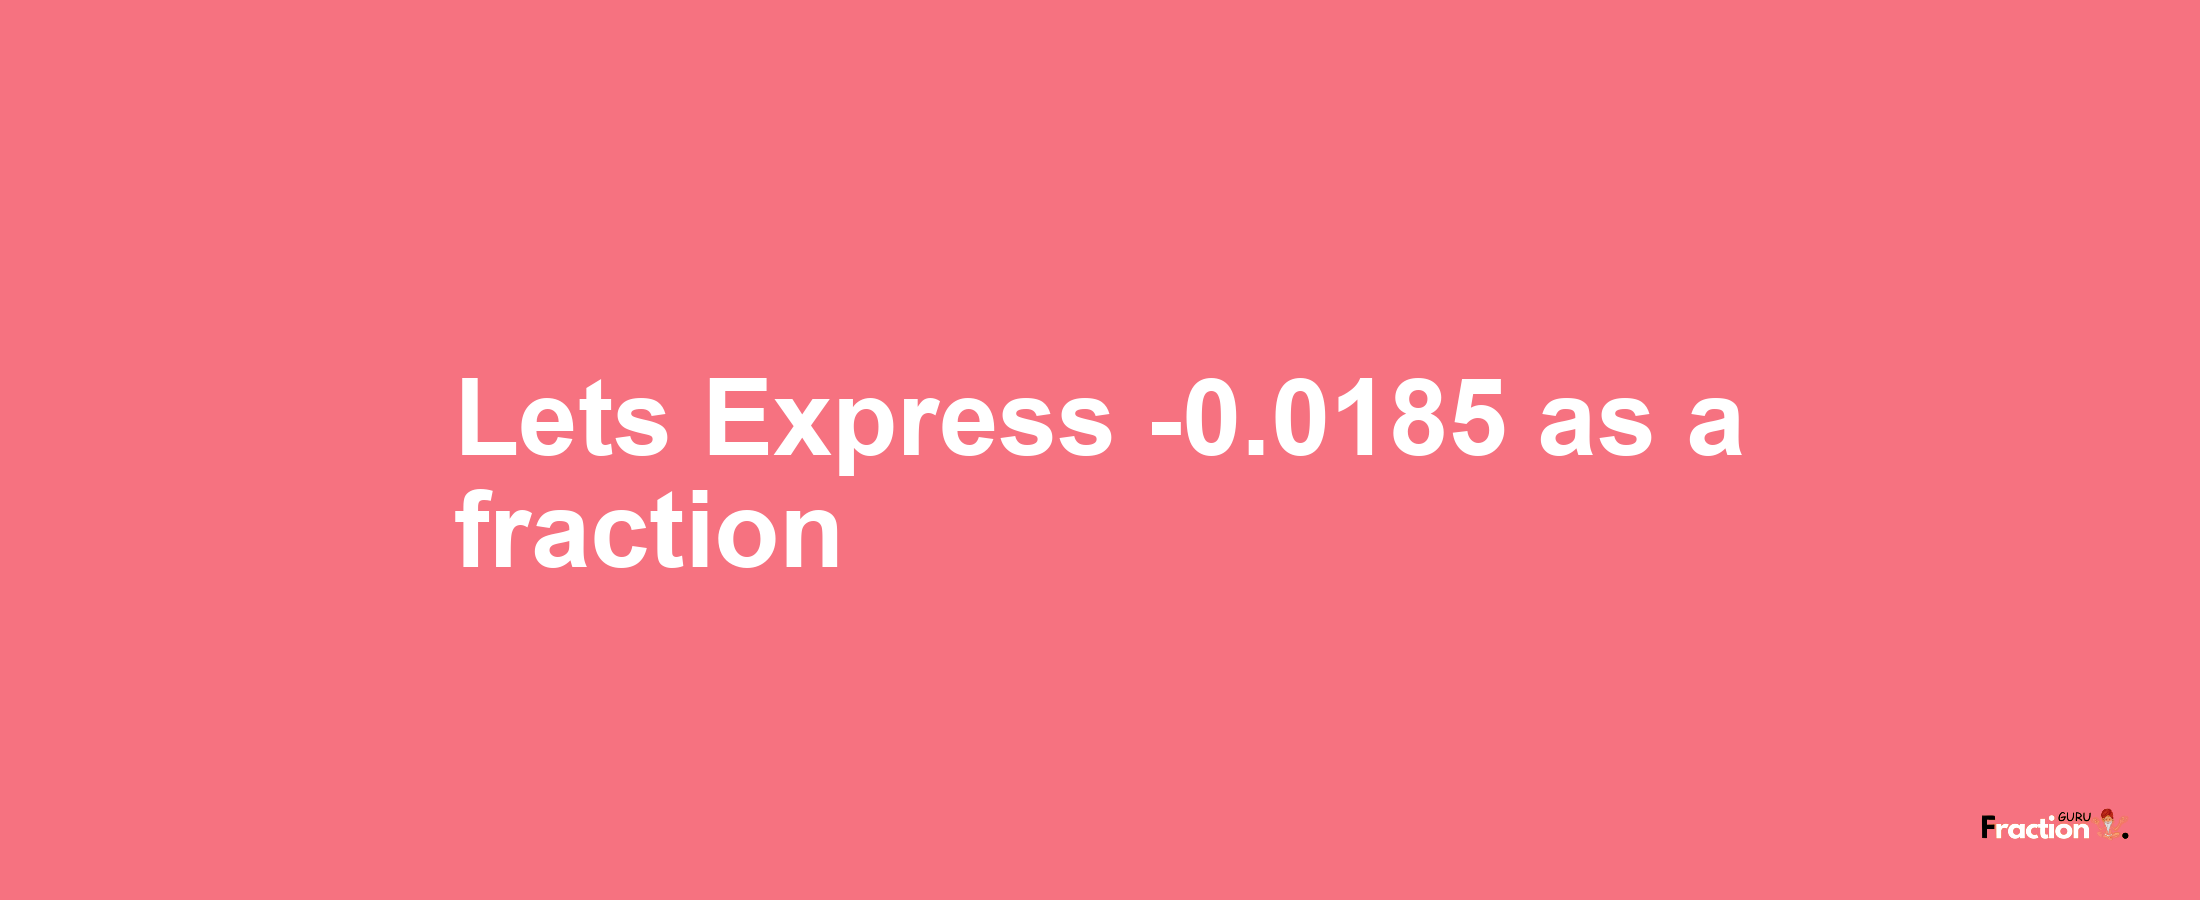 Lets Express -0.0185 as afraction